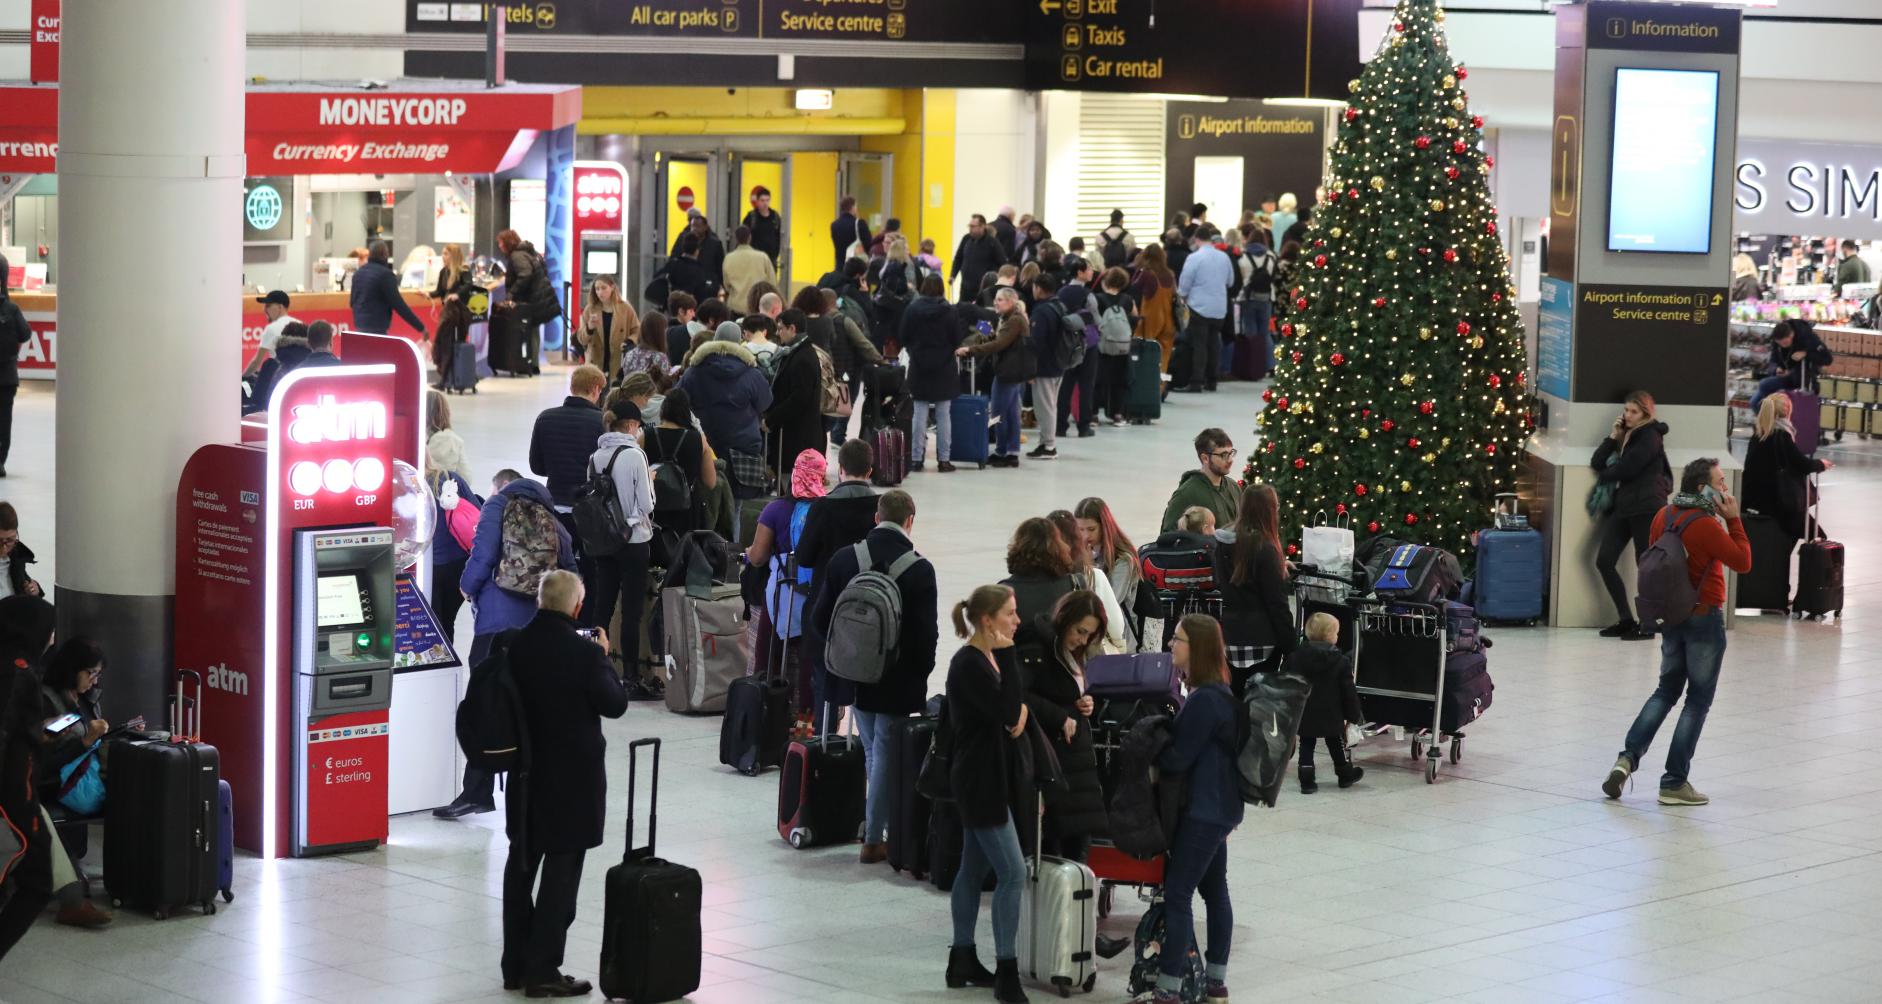 long queue at the airport during the holidays, six month subscription as a gift idea